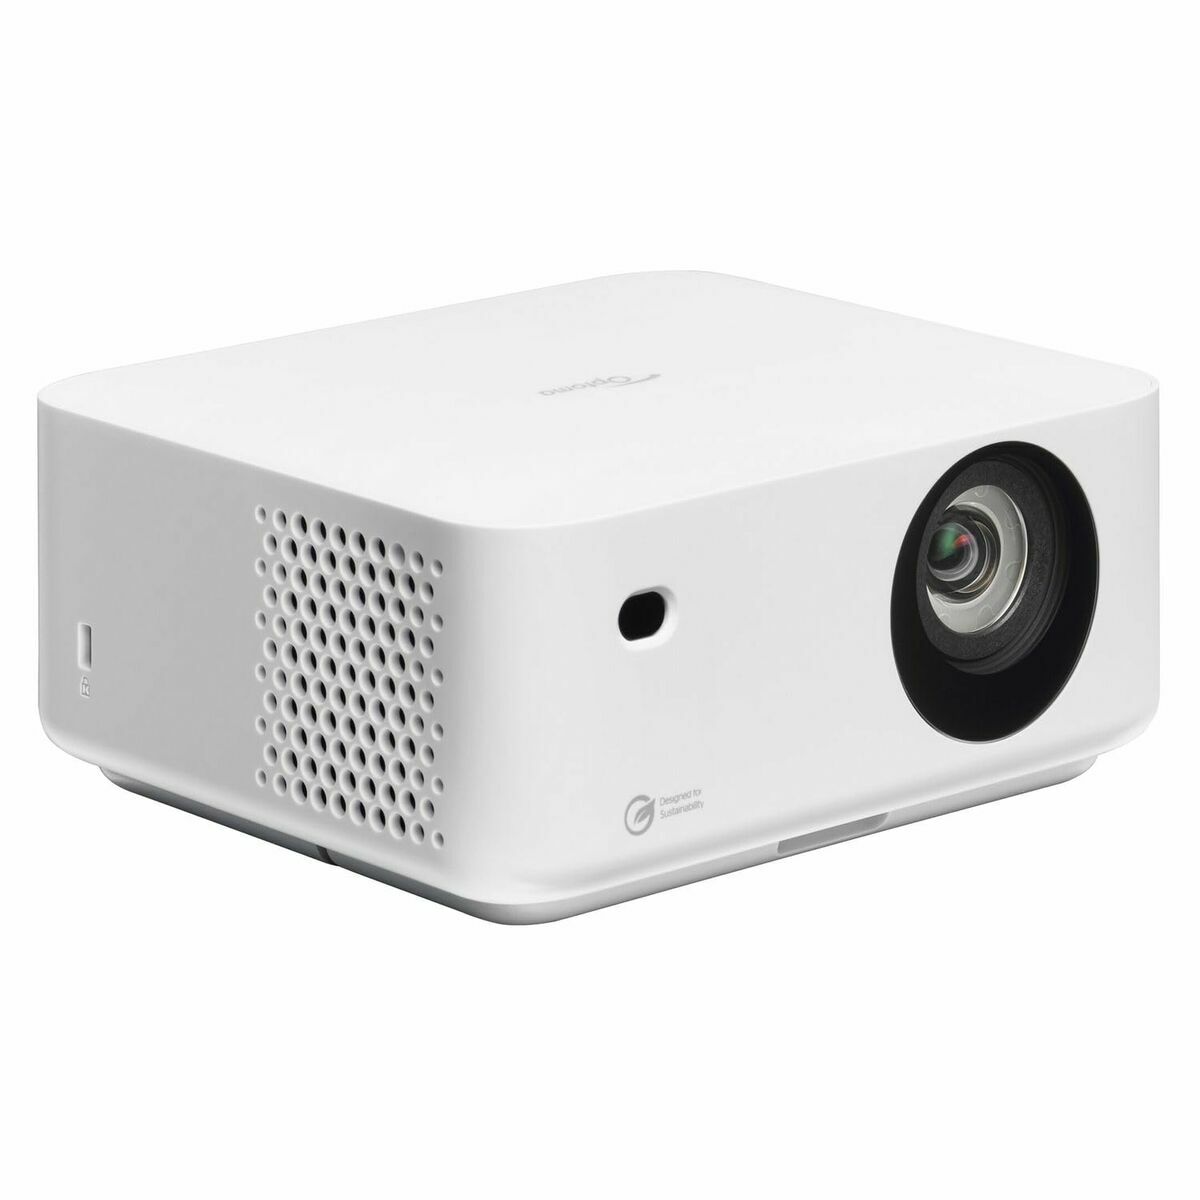 Projector Optoma E9PP7LB01EZ1 Full HD 550 lm 1920 x 1080 px, Optoma, Electronics, TV, Video and home cinema, projector-optoma-e9pp7lb01ez1-full-hd-550-lm-1920-x-1080-px, Brand_Optoma, category-reference-2609, category-reference-2642, category-reference-2947, category-reference-t-18805, category-reference-t-18811, category-reference-t-19653, cinema and television, computers / peripherals, Condition_NEW, entertainment, office, Price_900 - 1000, RiotNook